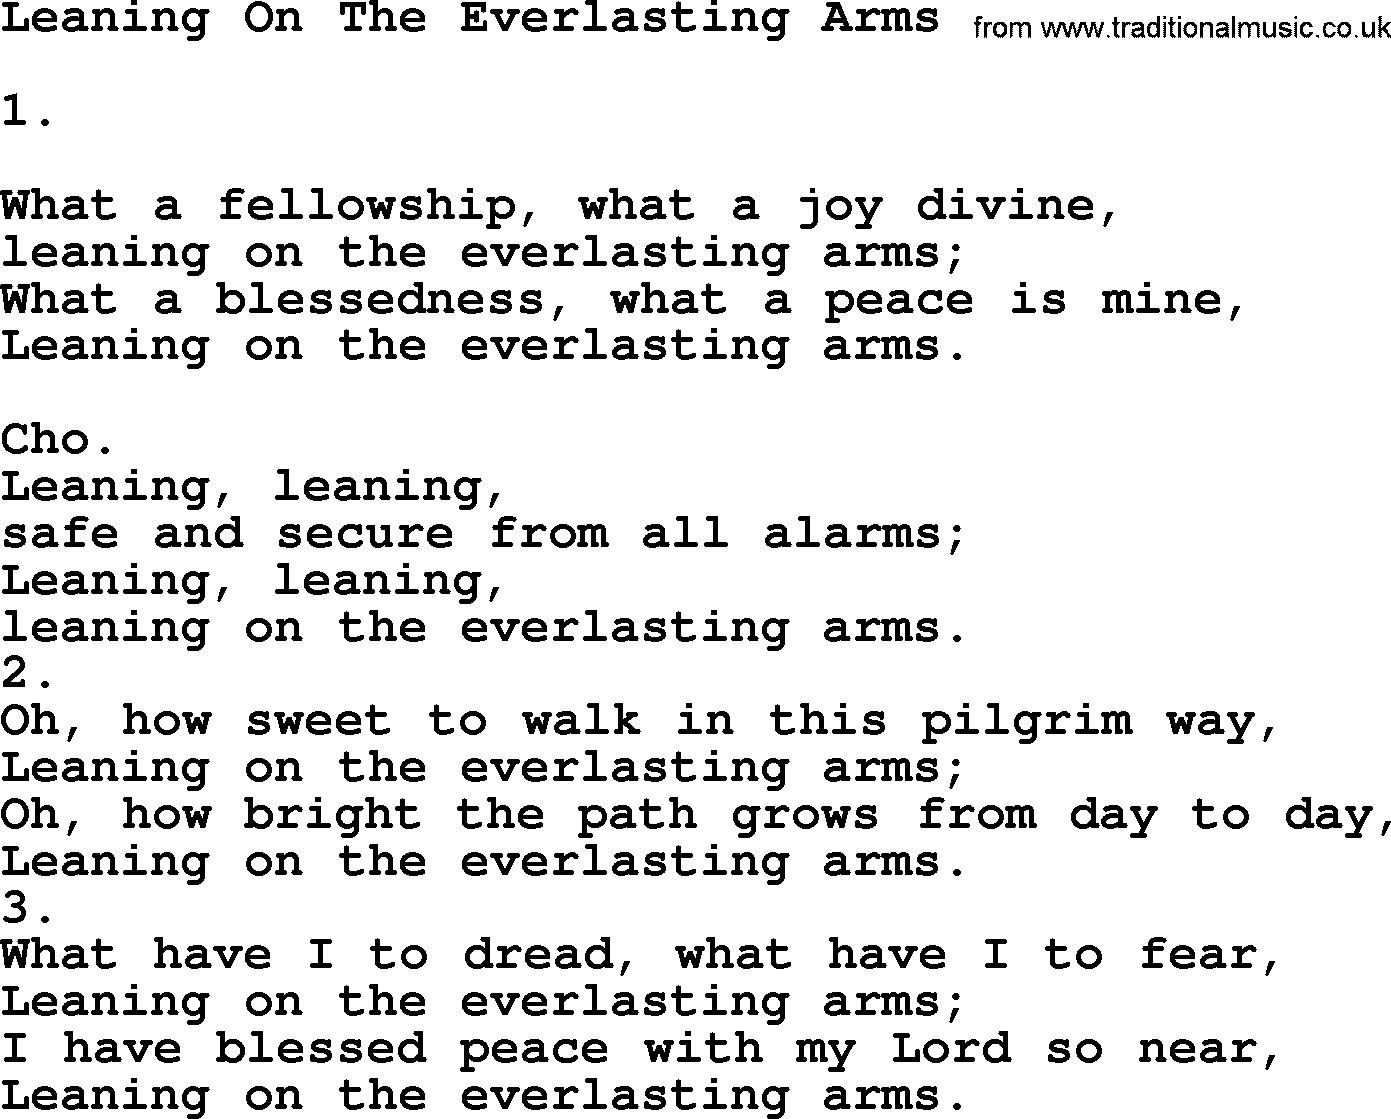 Apostolic & Pentecostal Hymns and Songs, Hymn: Leaning On The Everlasting Arms lyrics and PDF